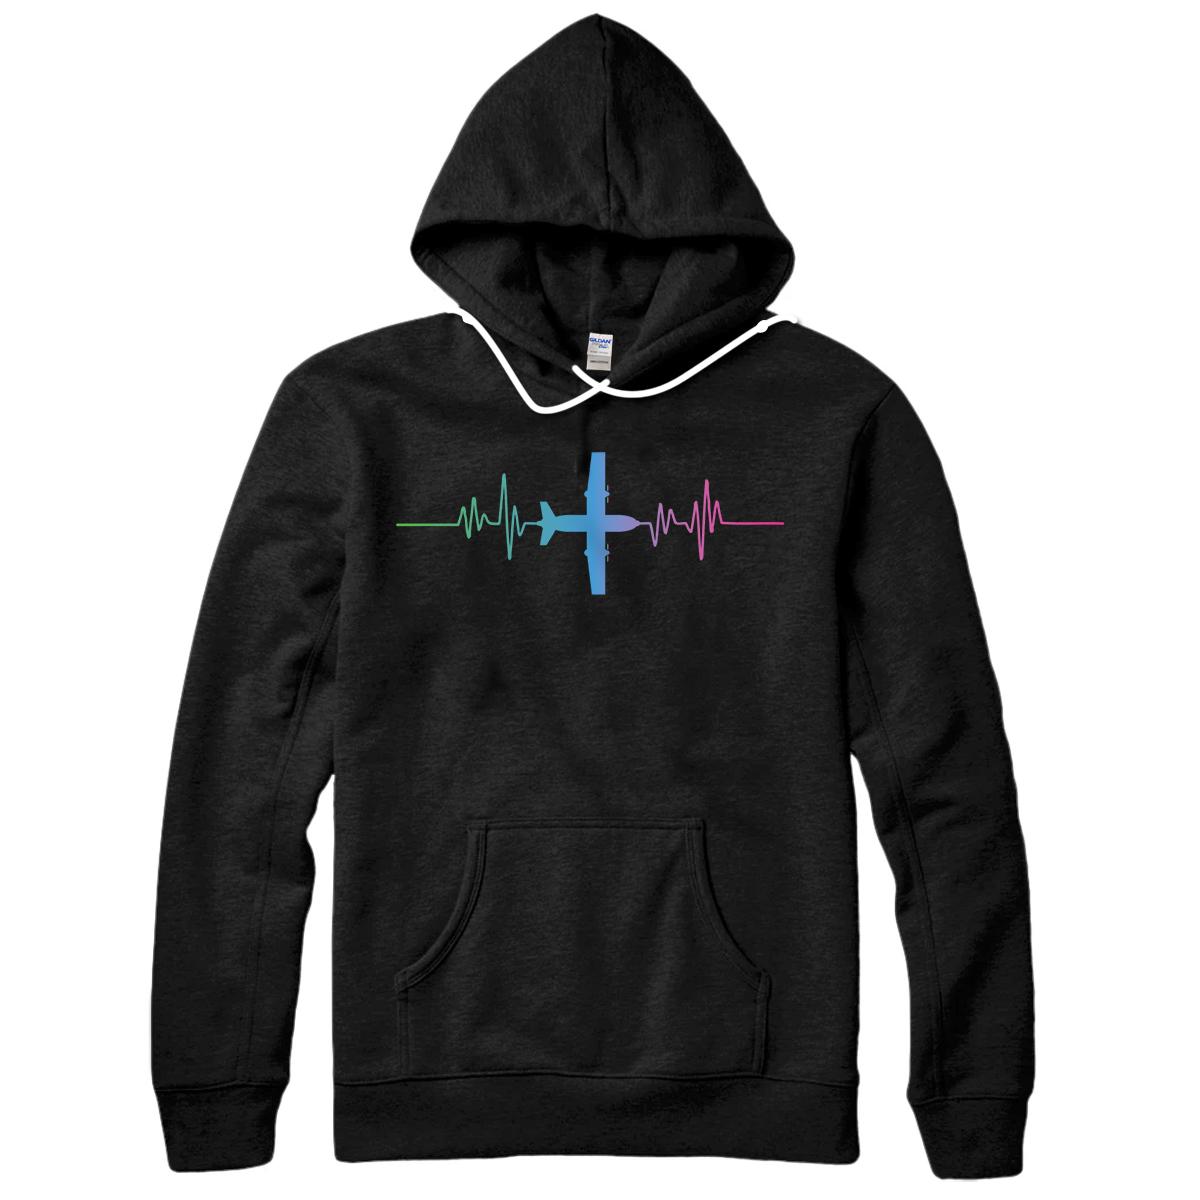 Personalized Pilot Airplane Heartbeat Plane Aviation Gift Pullover Hoodie